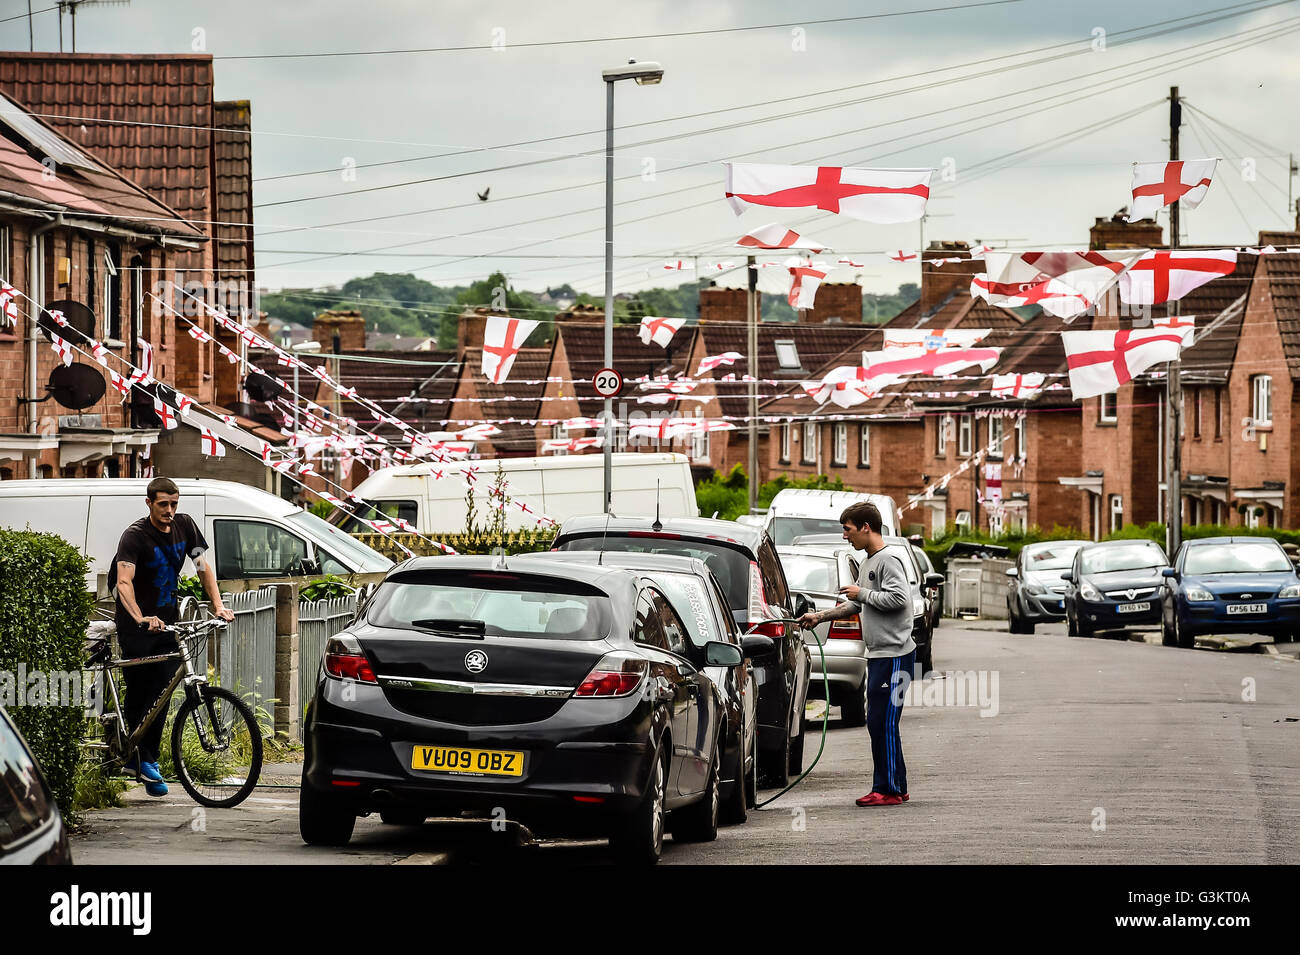 England flags are strung across Torrington Avenue in the Knowle West area of Bristol as residents support England during the Euro 2016 football tournament in France. Stock Photo